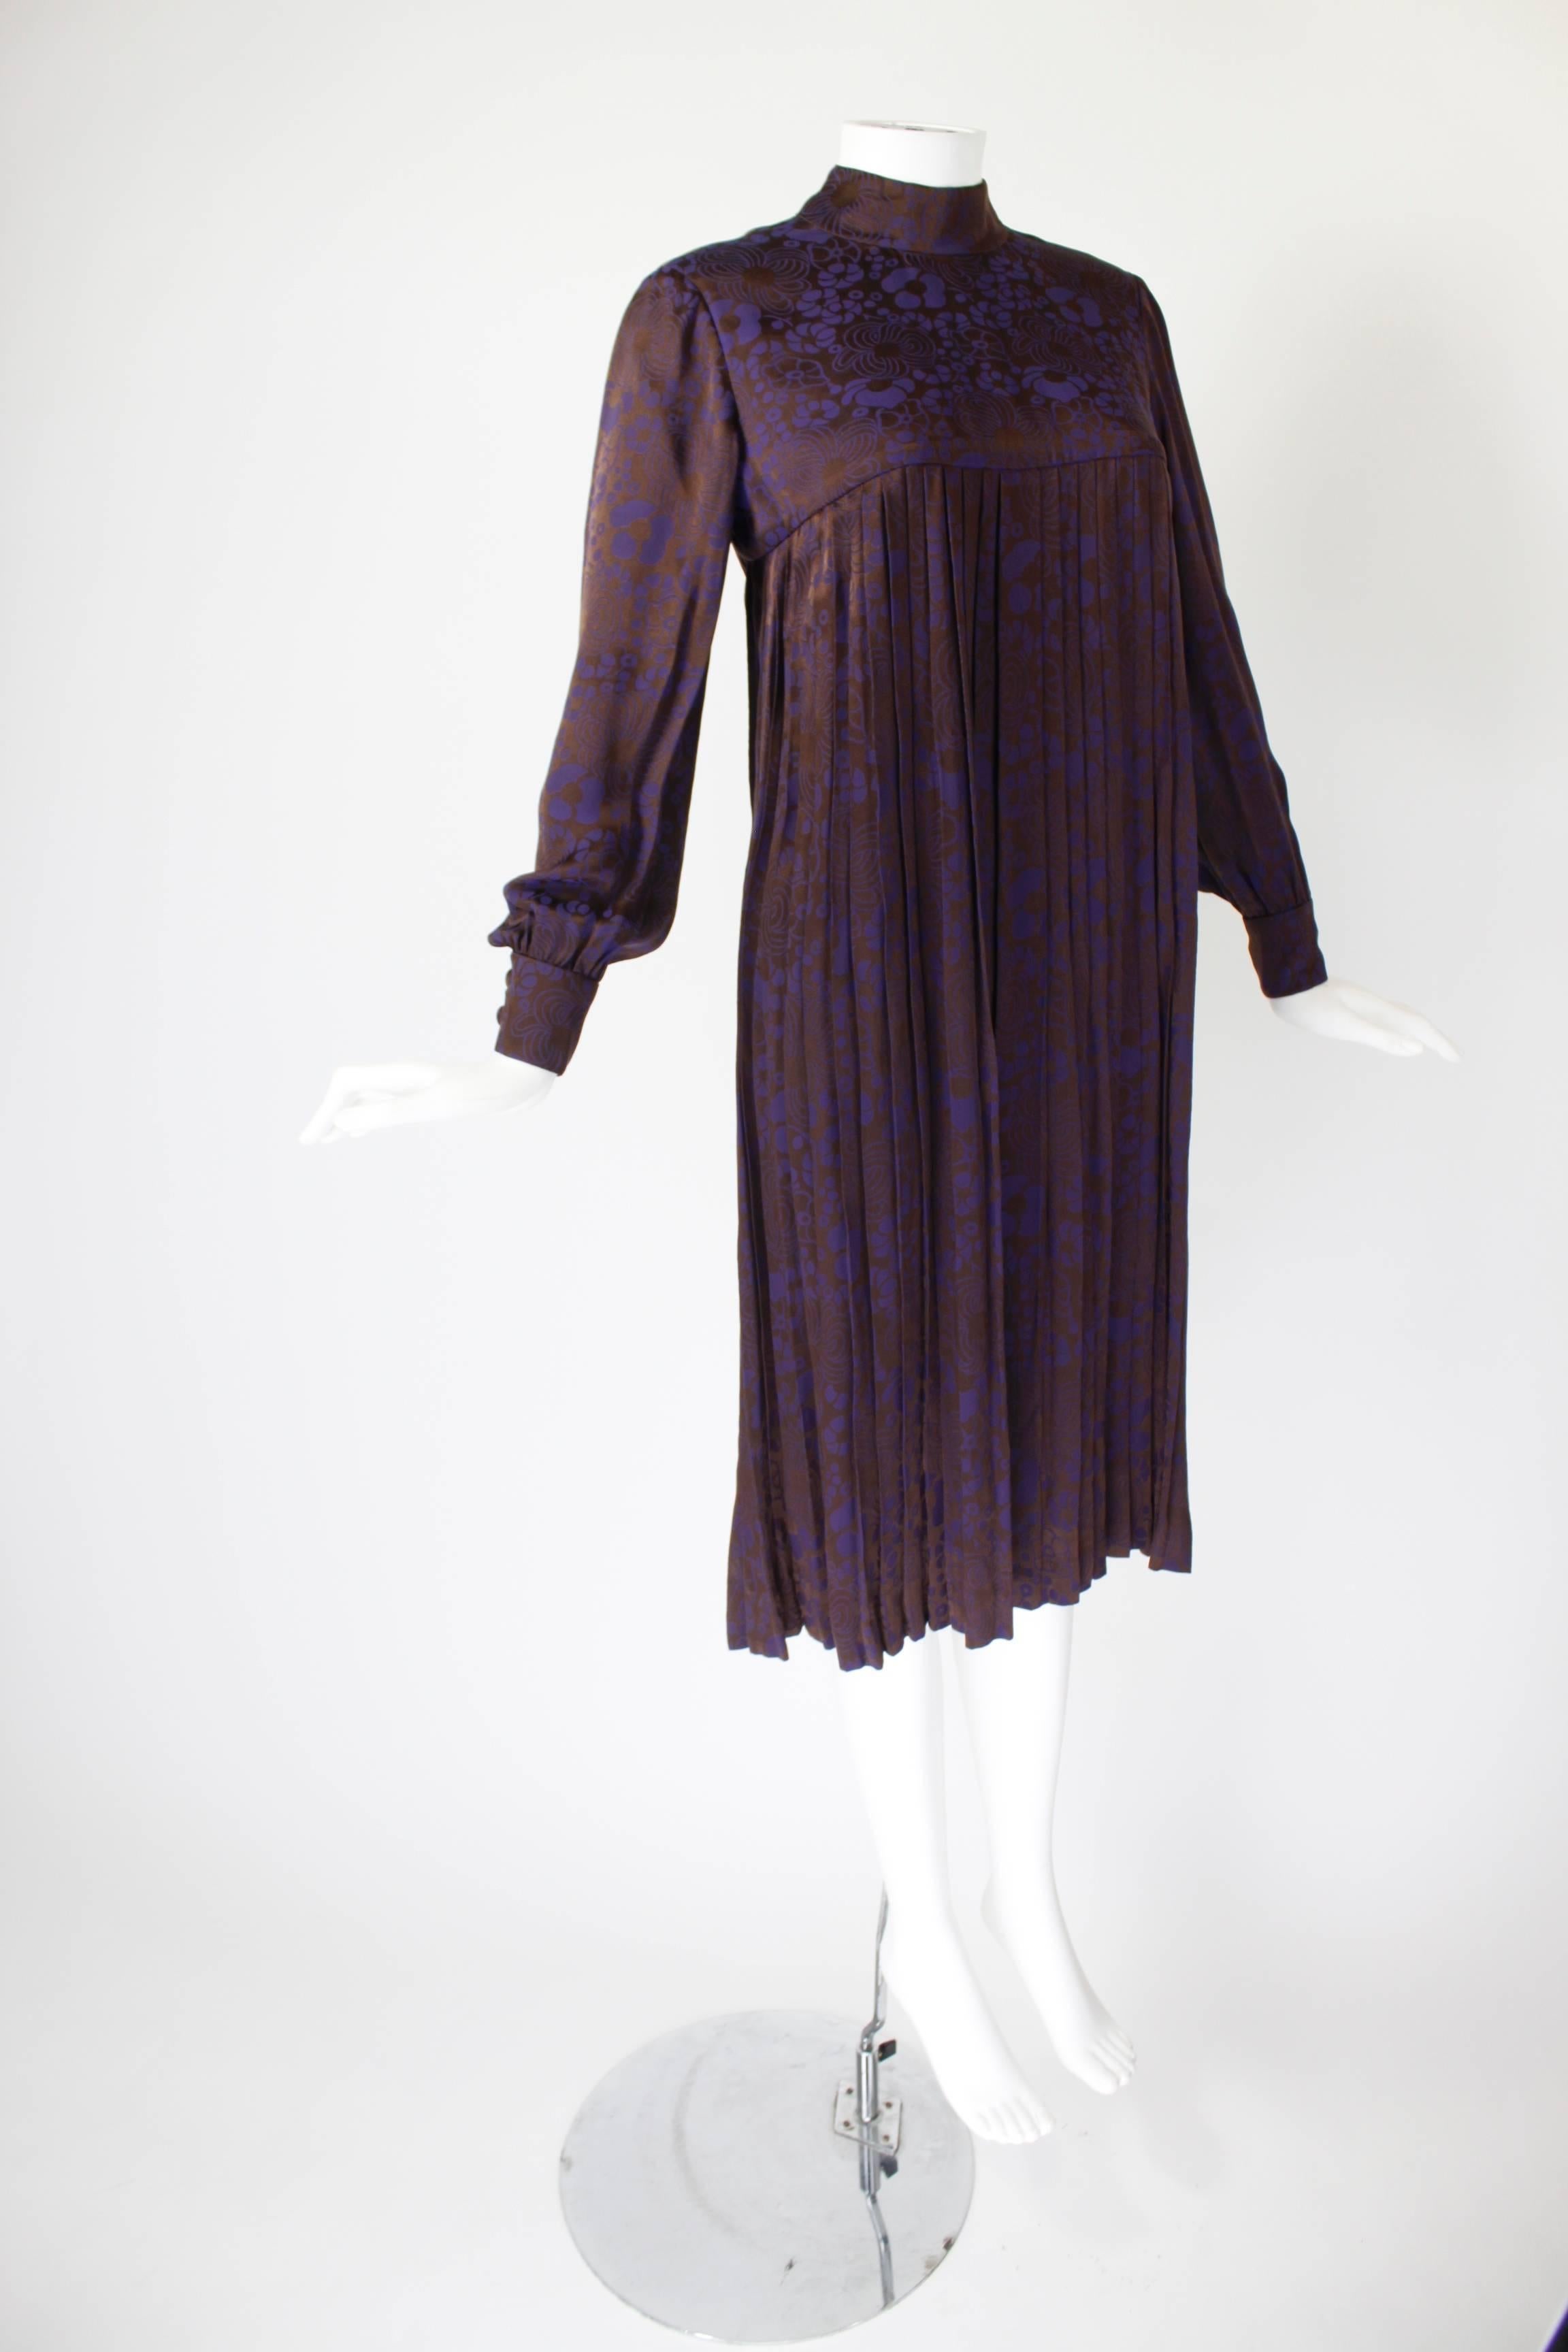 Women's Christian Dior New York Purple Floral Pleated Dress For Sale